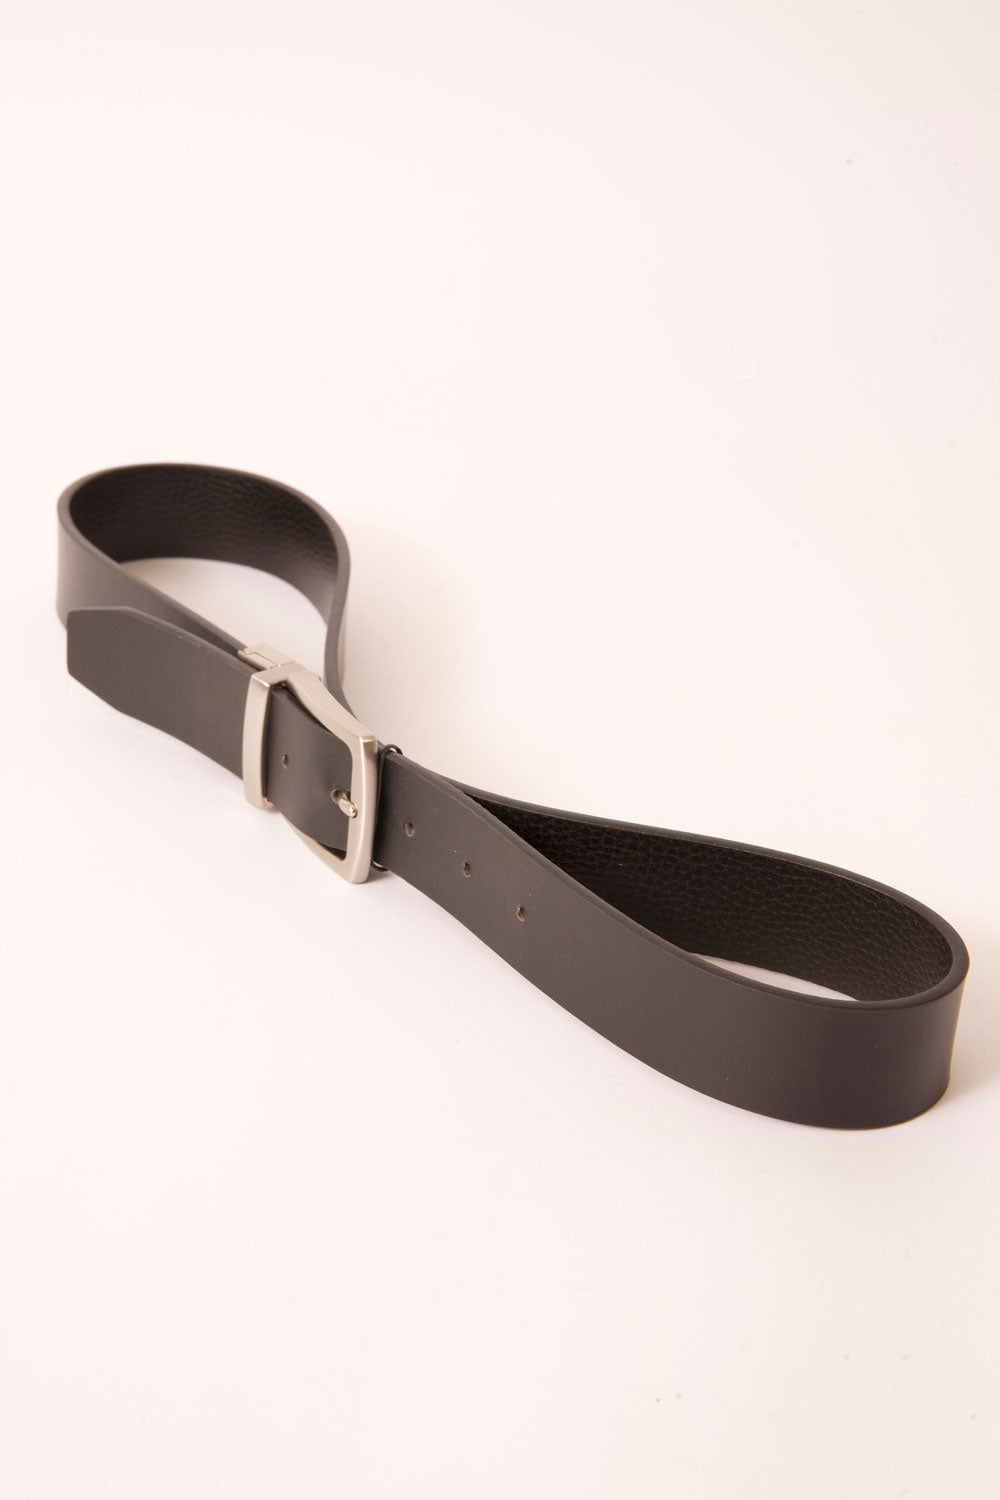 Leather Belts | Mens Leather Belts Makers - Womens American Hat Belts | Leather